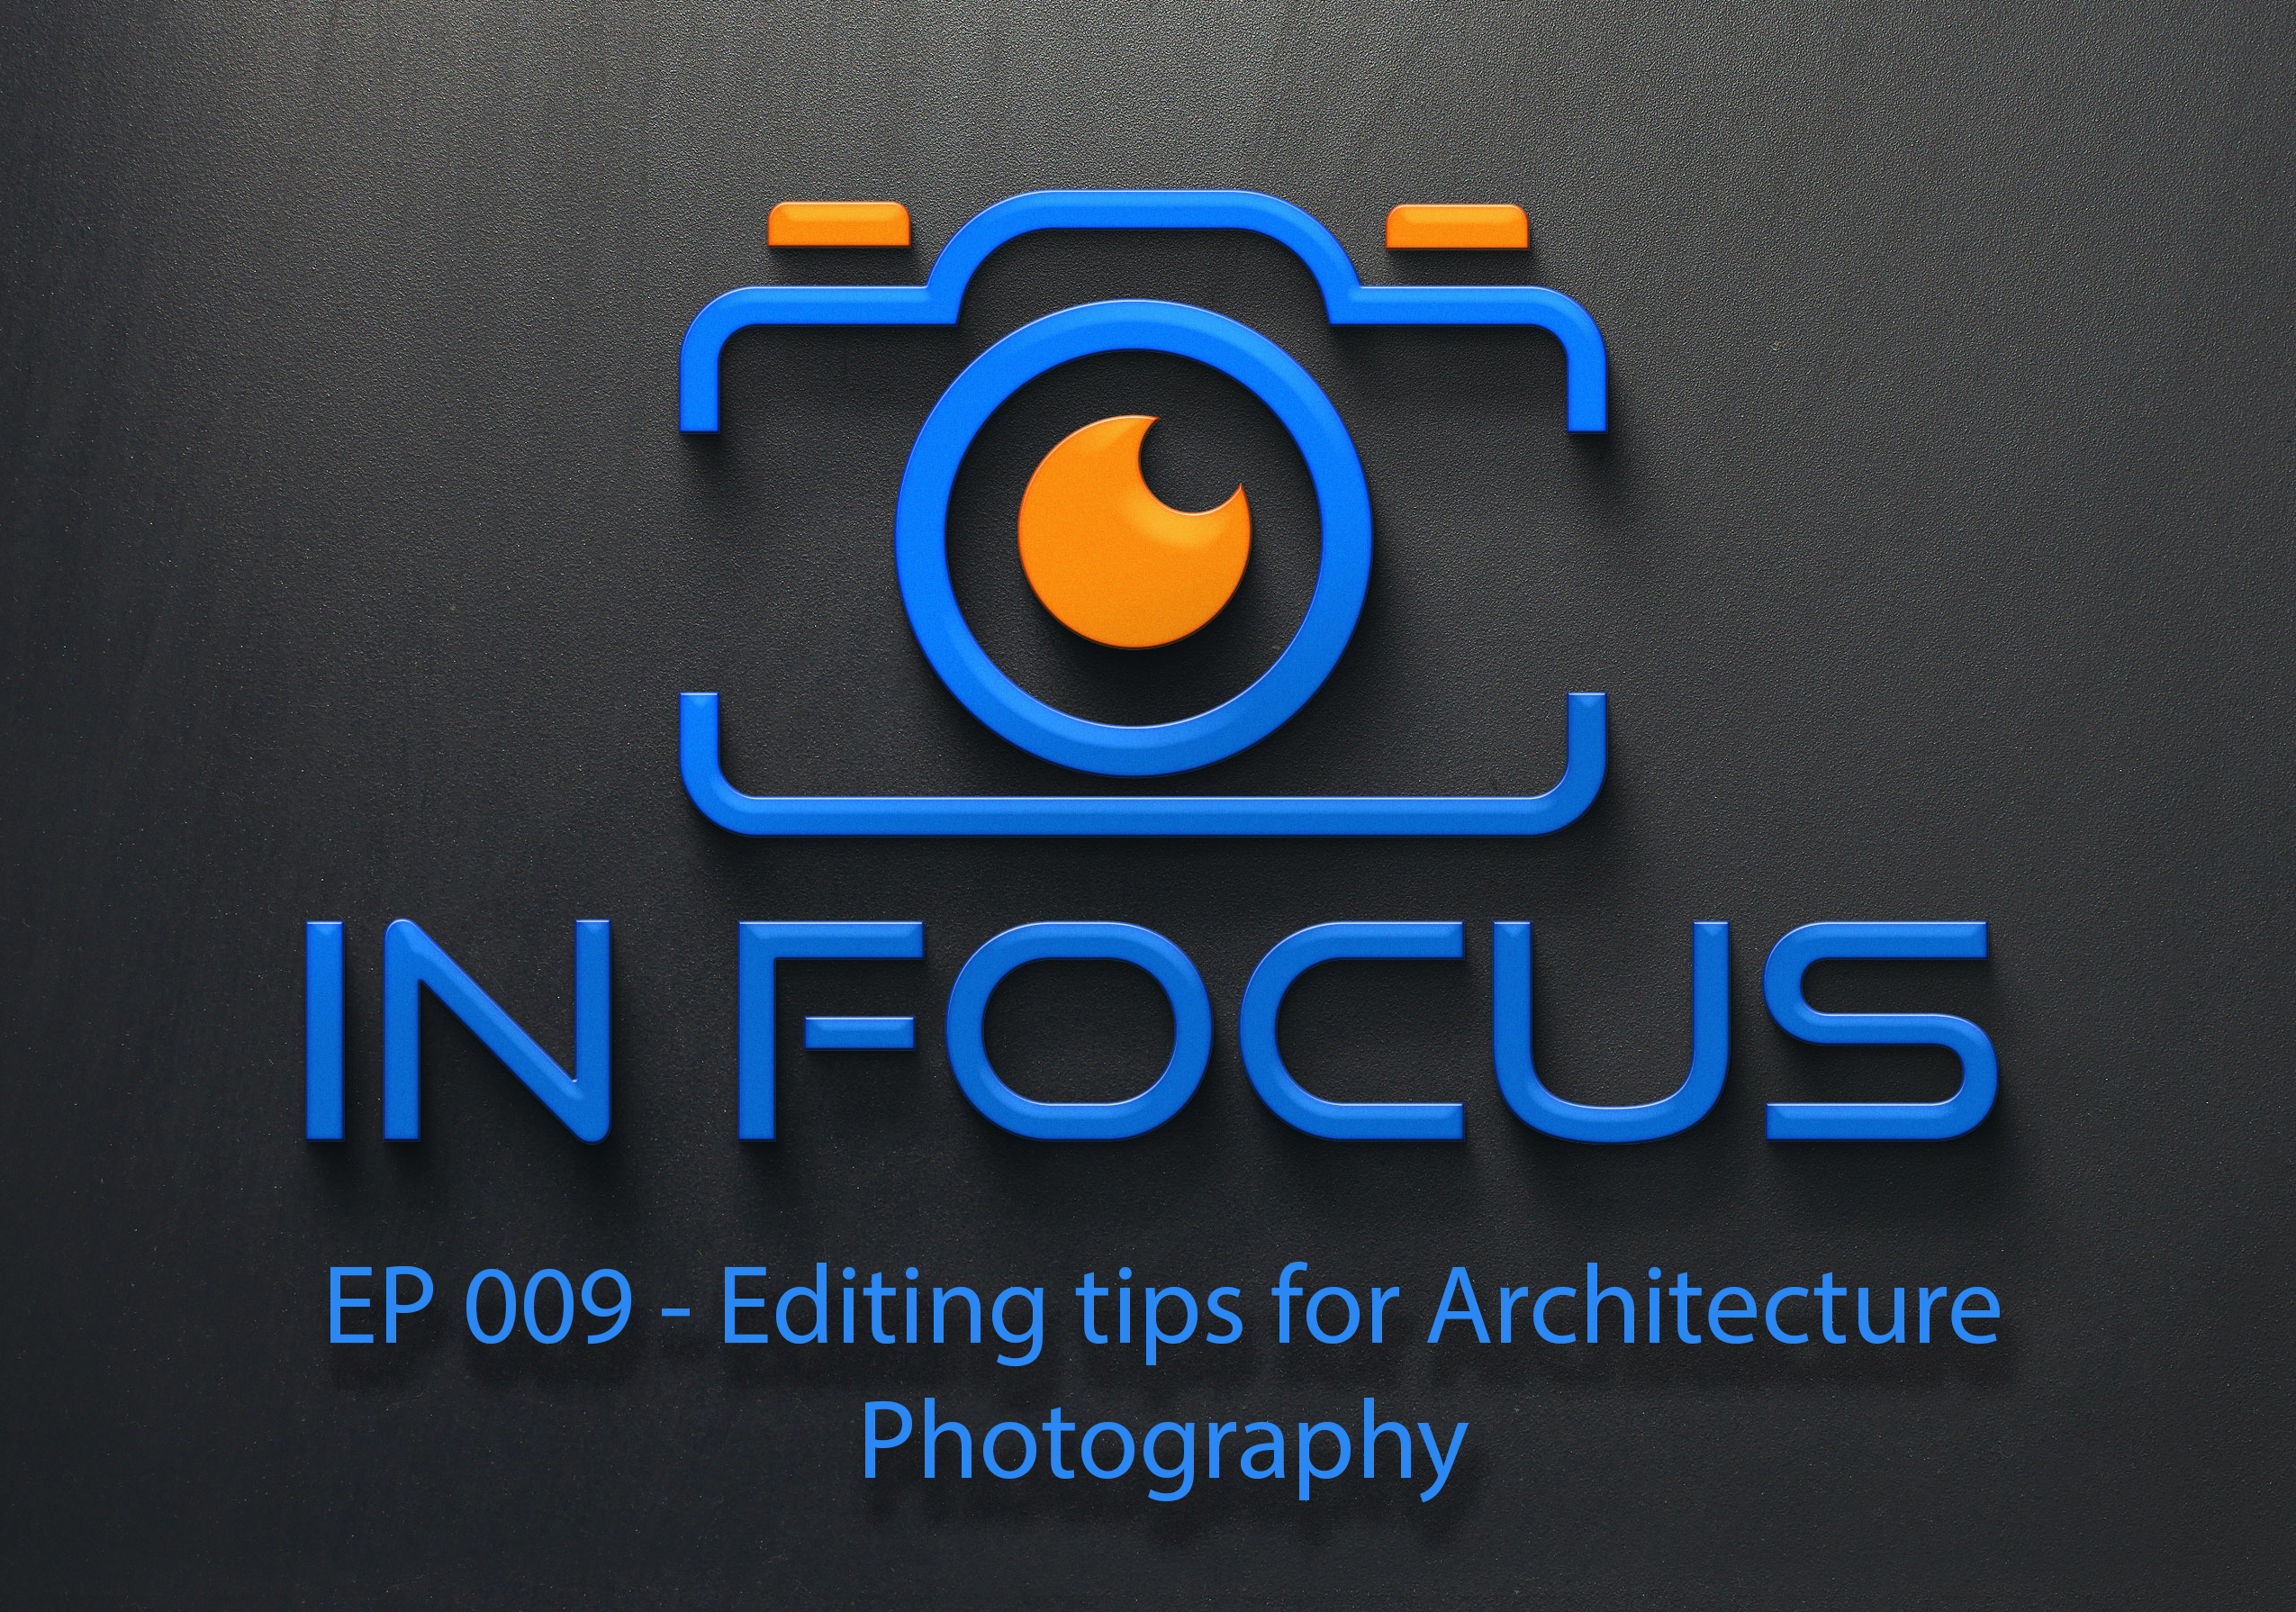 Editing Tips for Architecture Photography